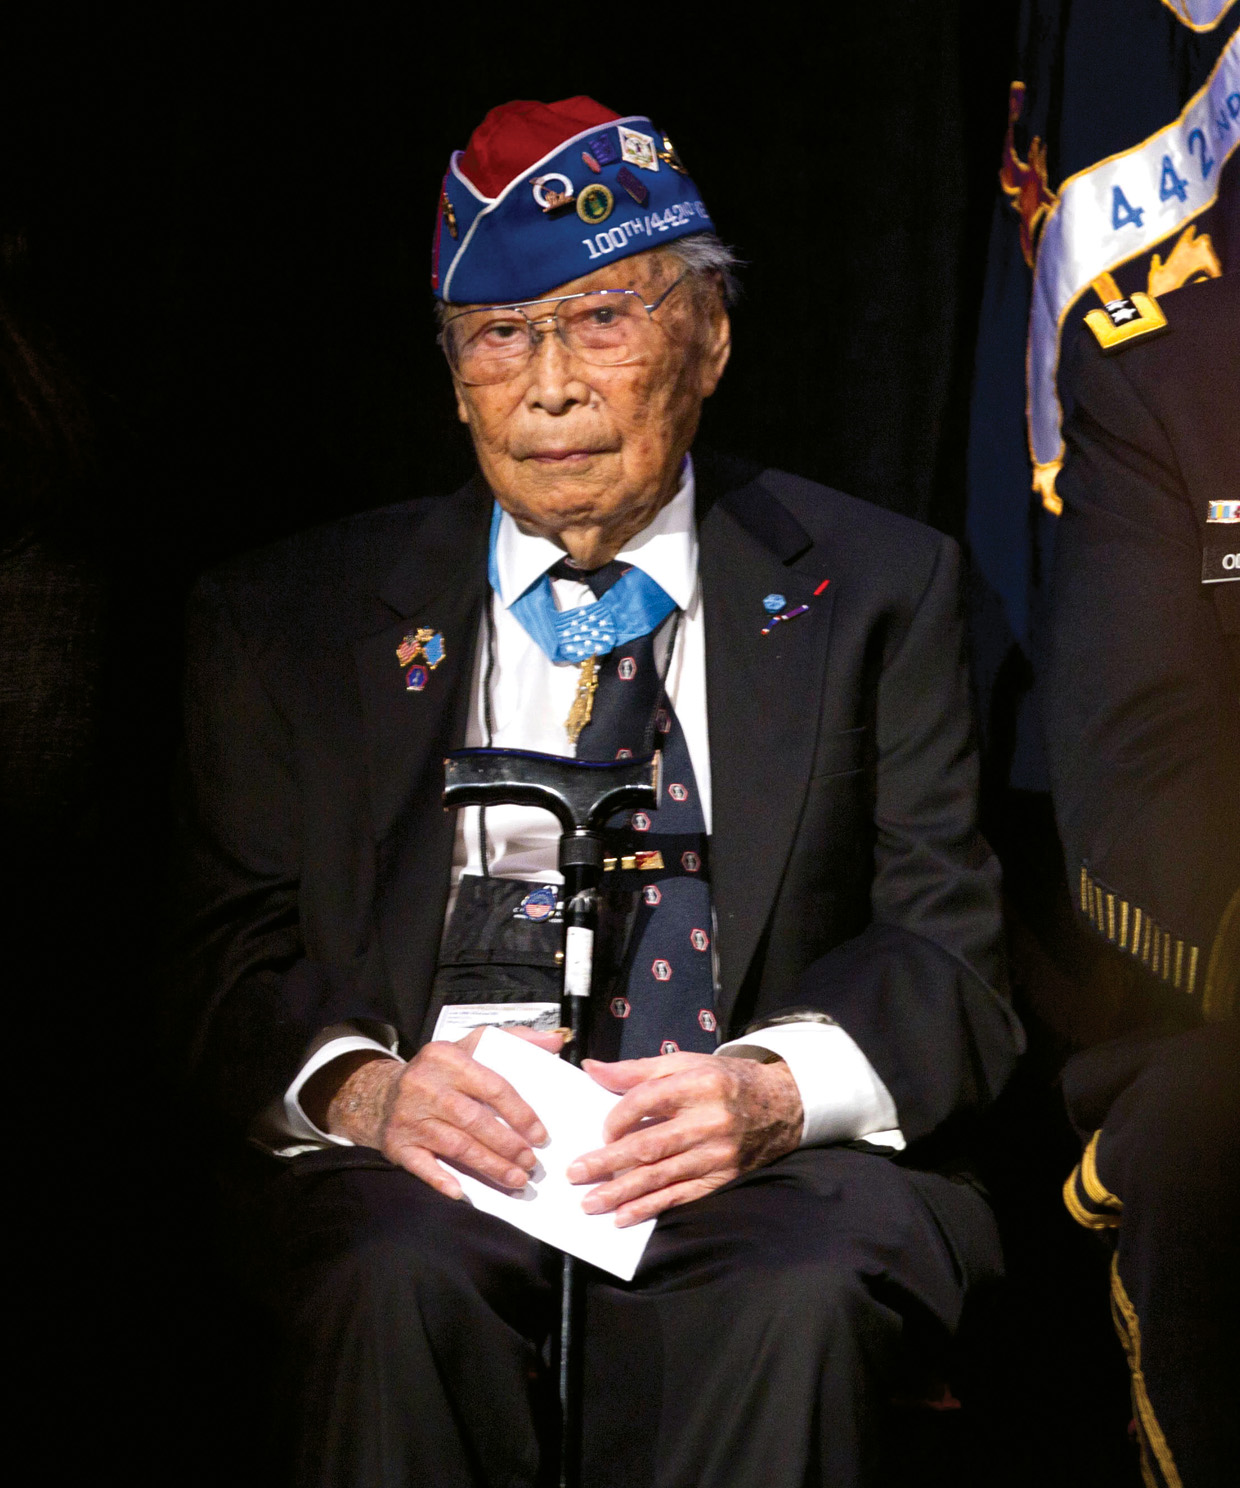 Joe Sakato received the Medal of Honor for gallantry in France but asserted, “I’m no hero.” He died in 2015 at the age of 94.